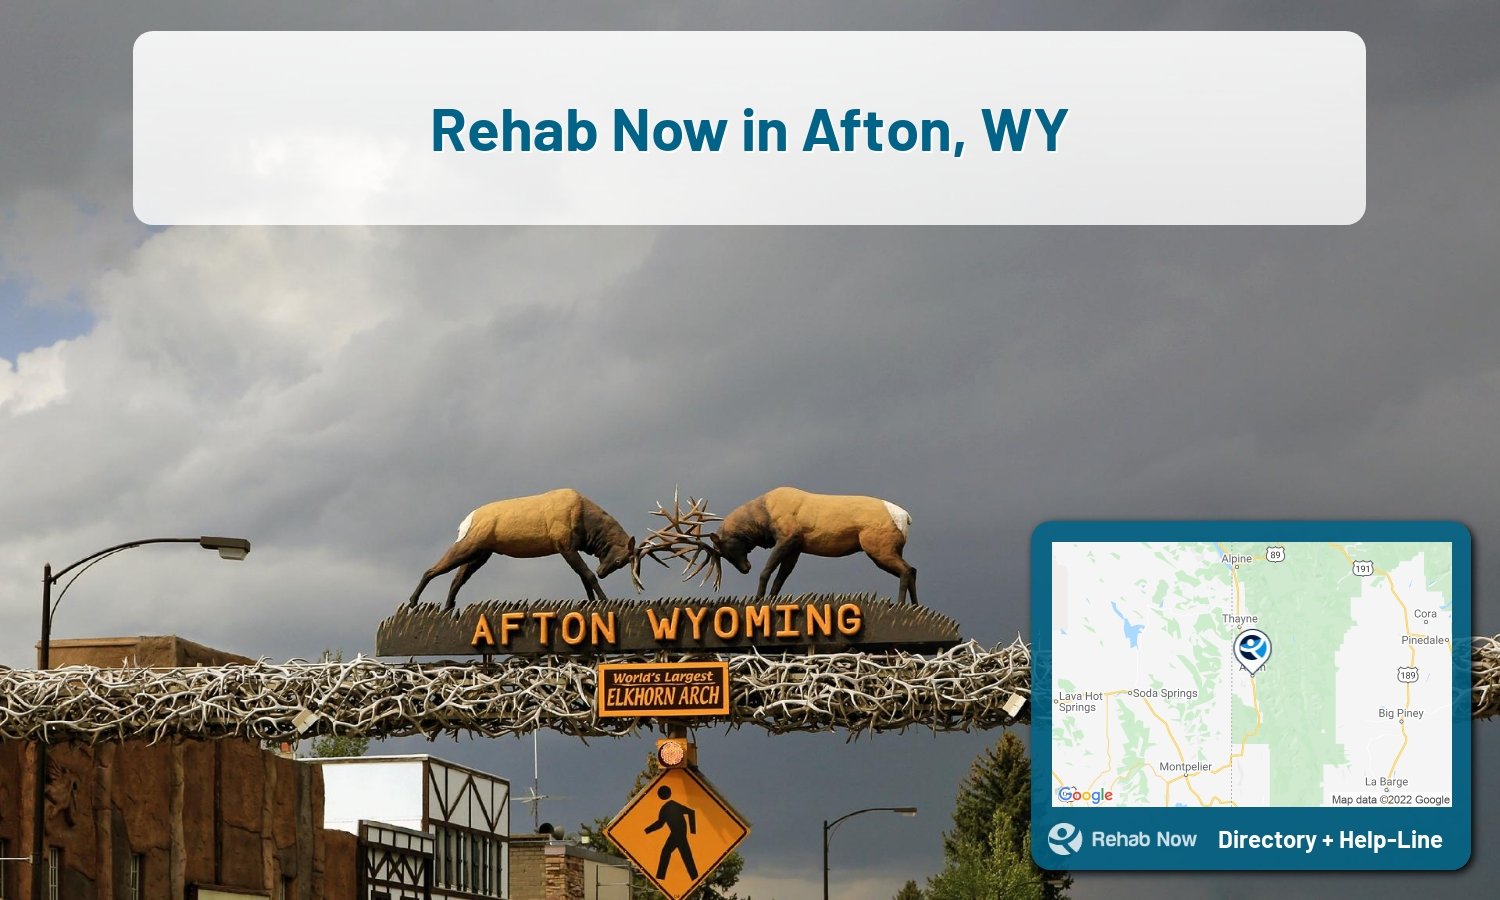 Let our expert counselors help find the best addiction treatment in Afton, Wyoming now with a free call to our hotline.